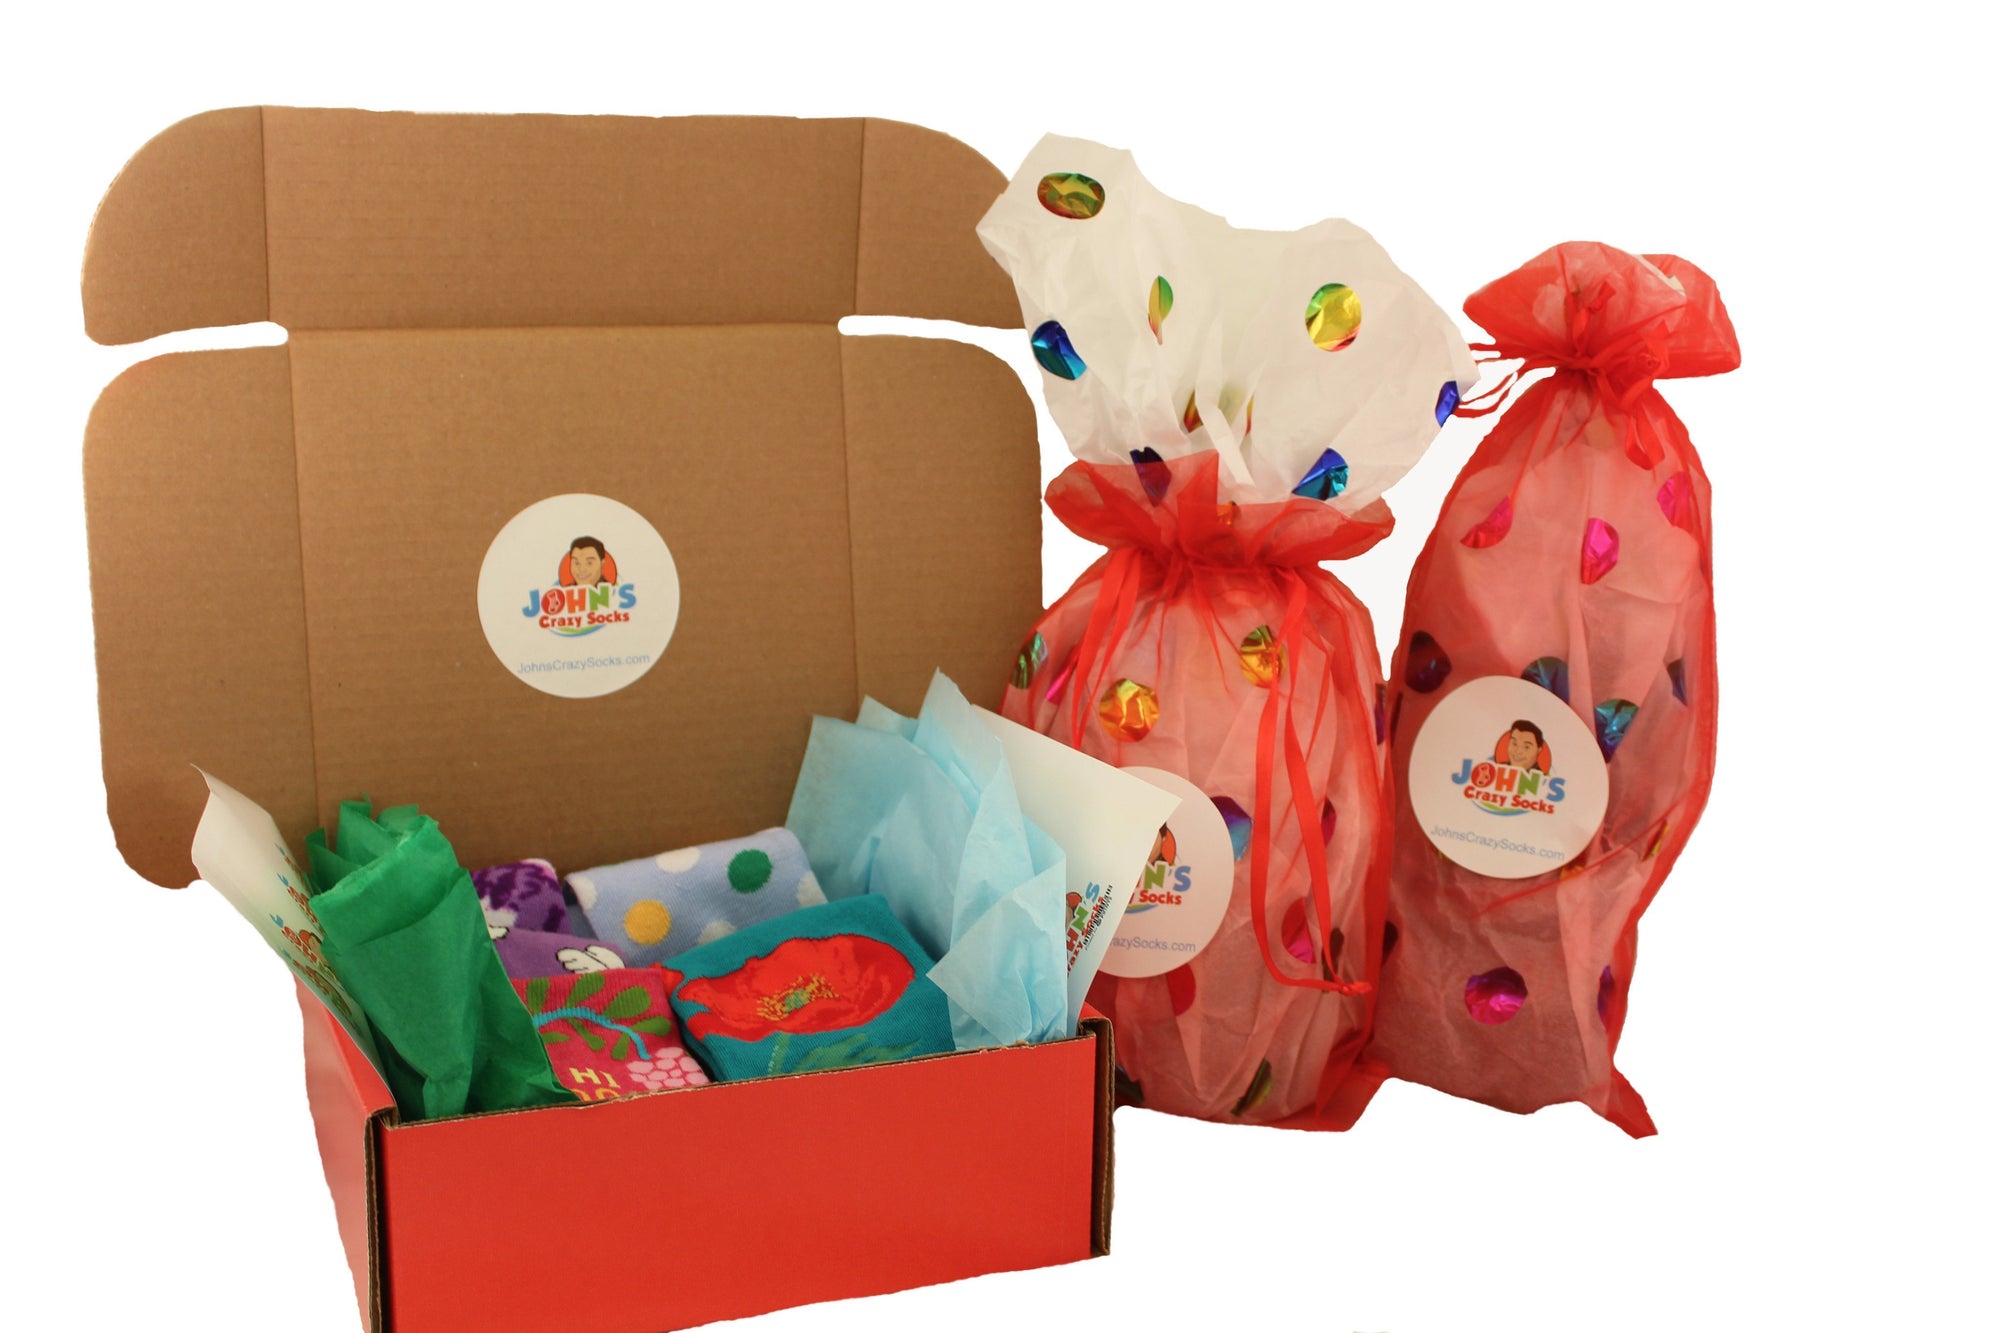 John’s Crazy Socks Introduces Gift Wrapping Options